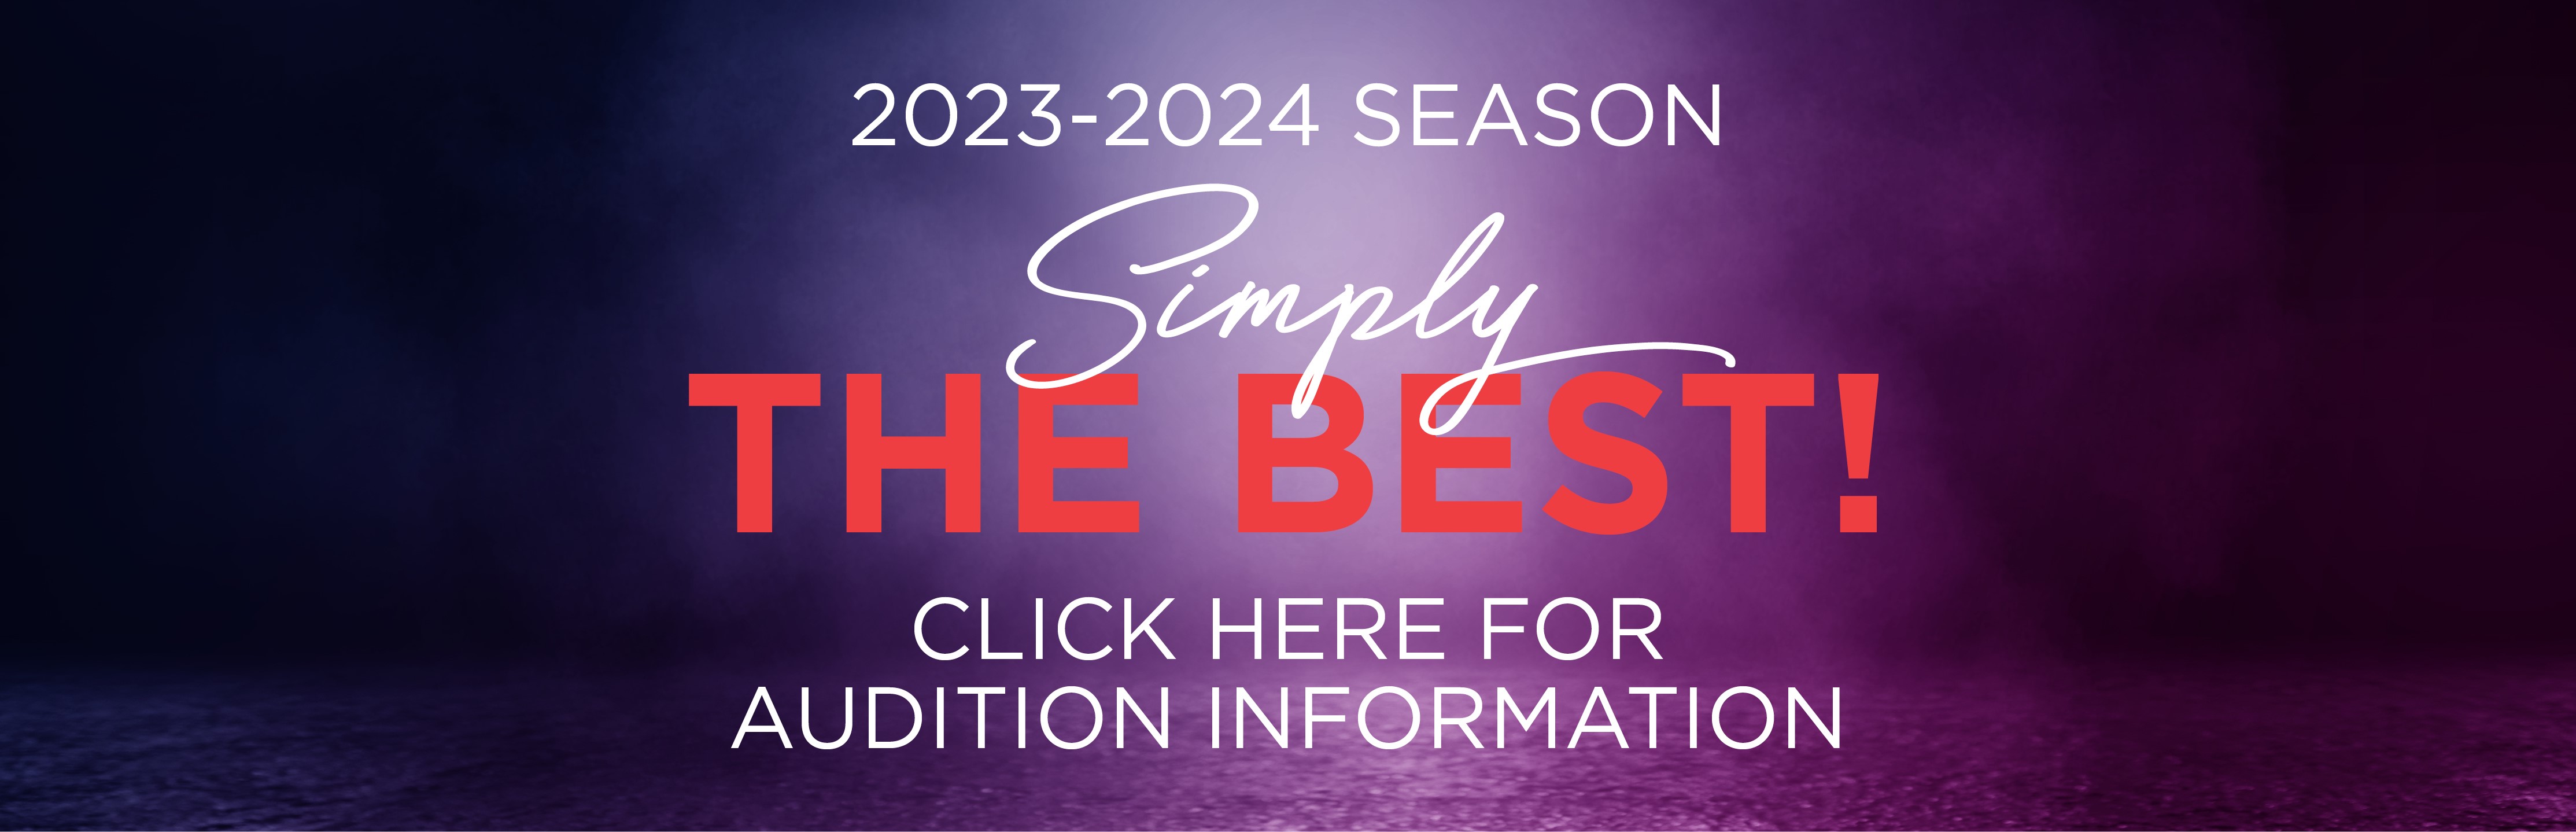 2023-2024 Season: Simply the Best! Click here for Audition Information!